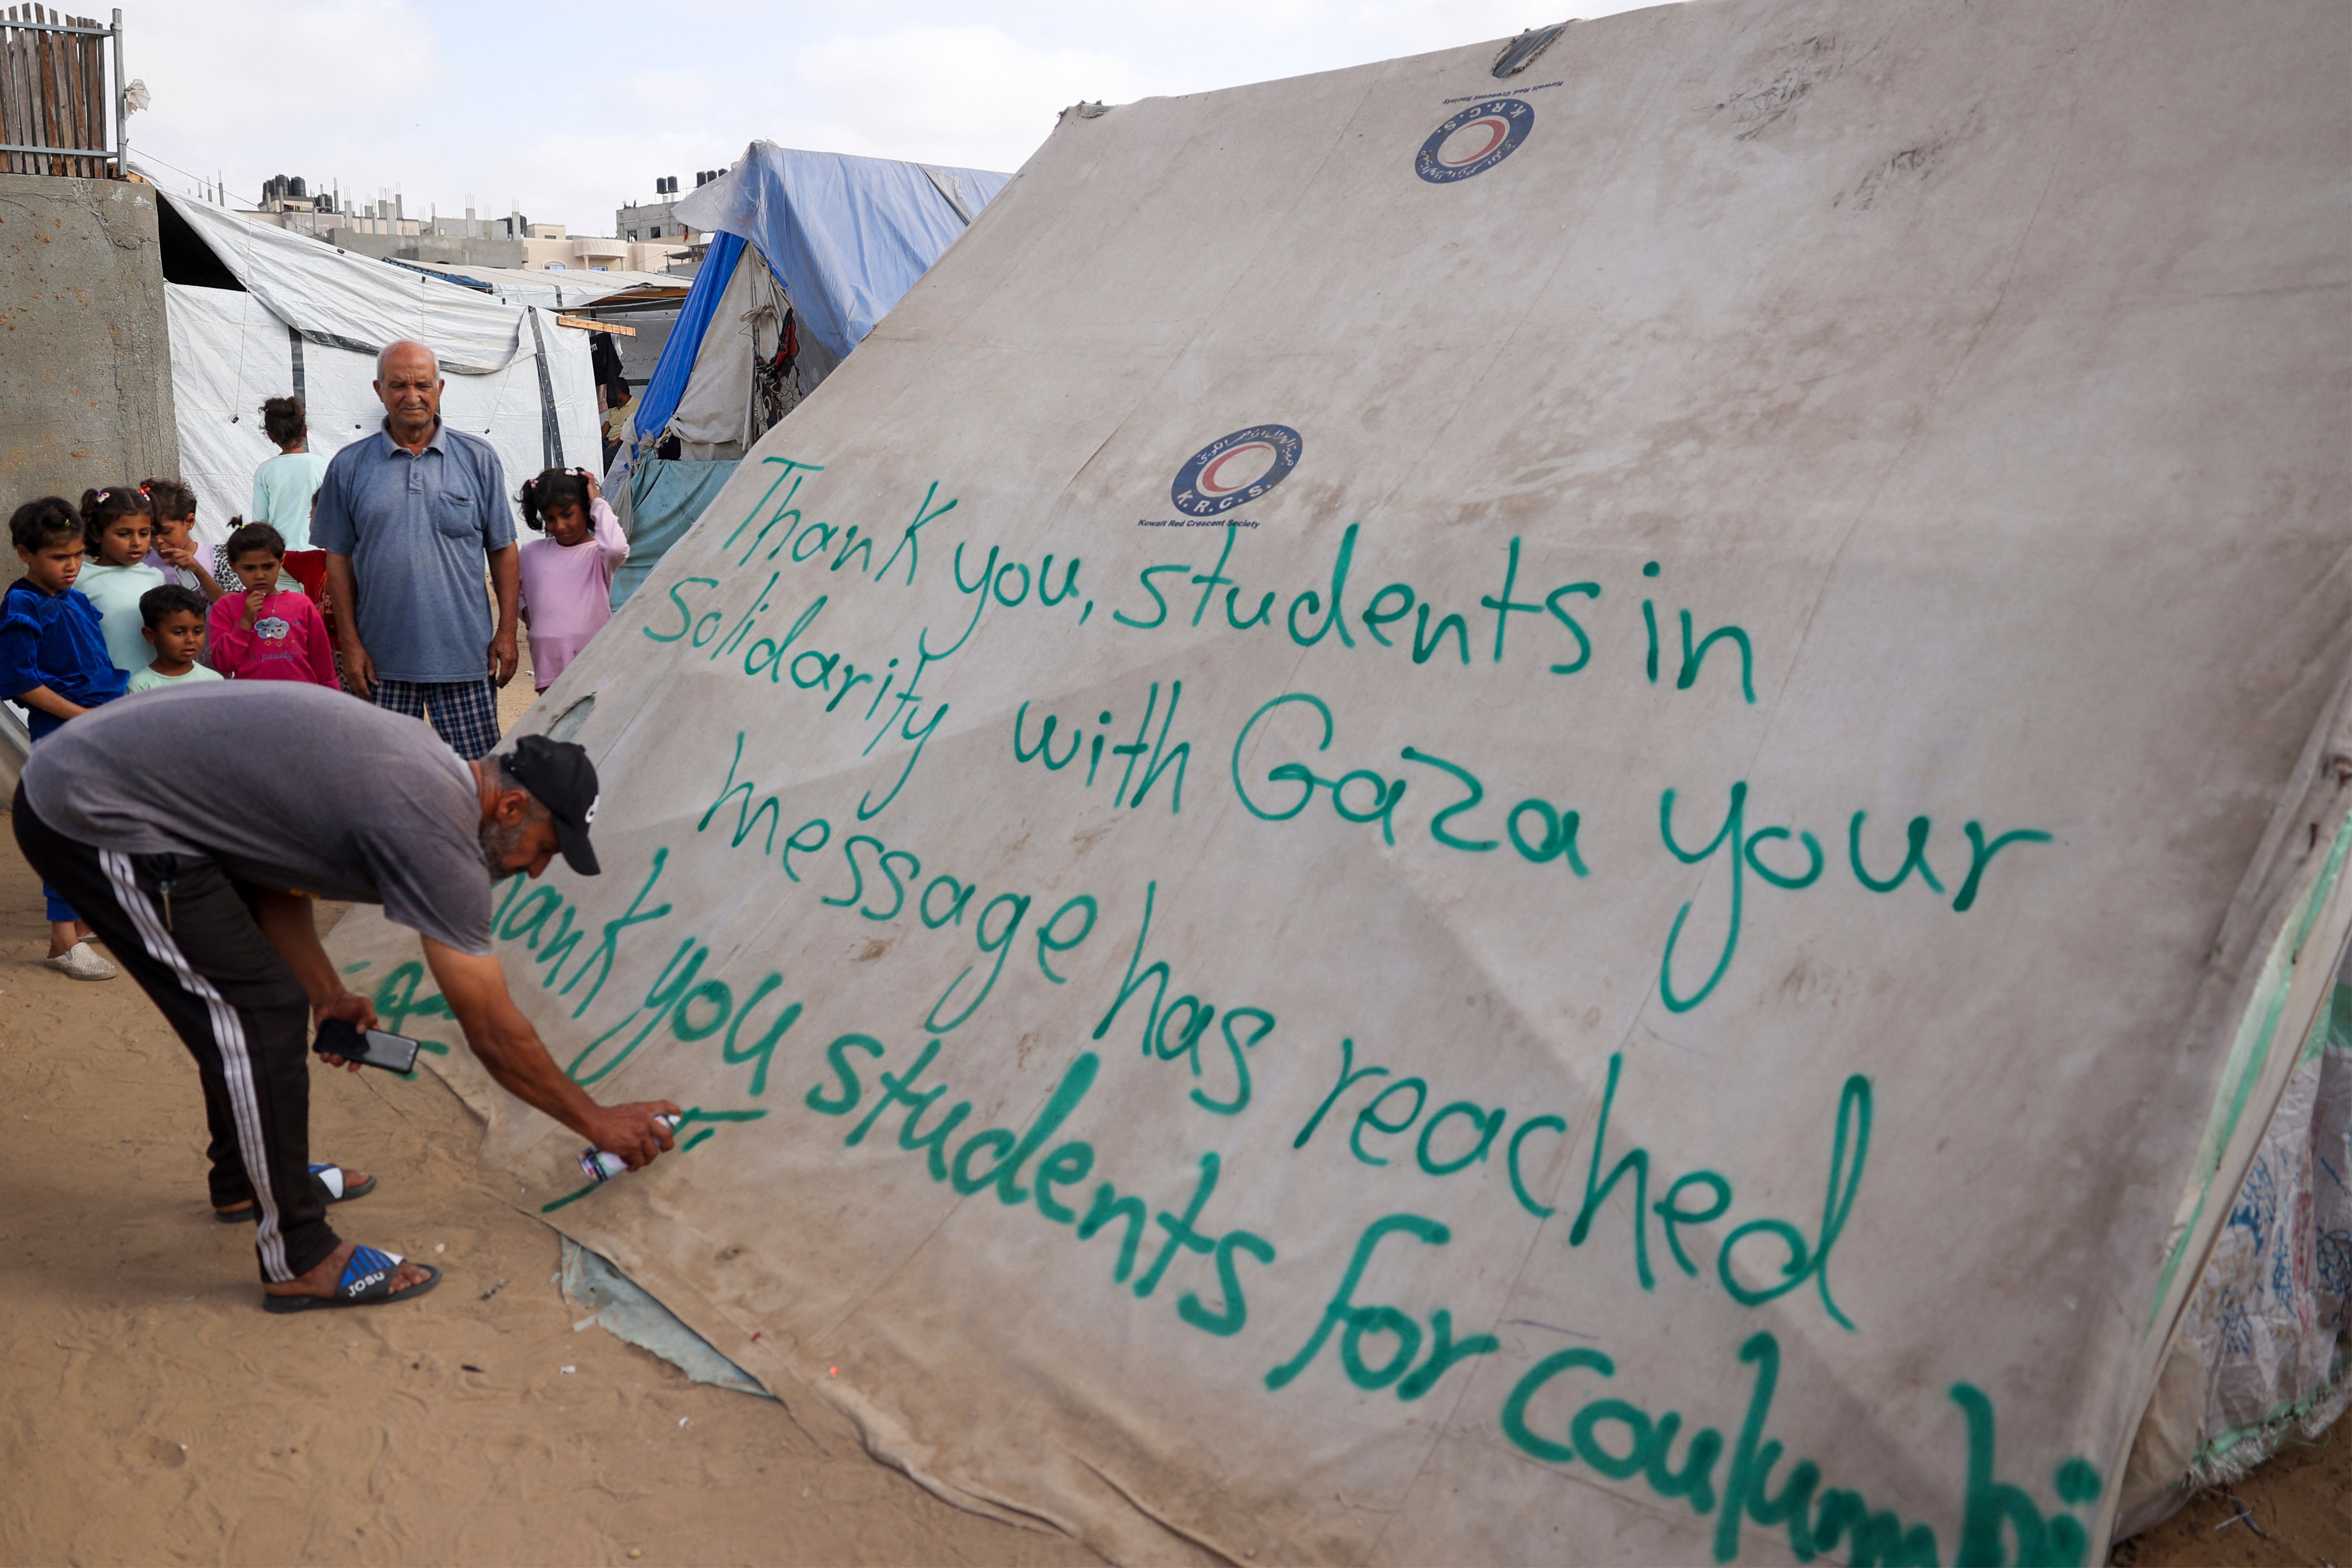 A sign in Gaza that reads, “Thank you, students in solidarity wtih Gaza your message has reached. Thank you students for Coulumbia” pictured on 28 April. More than 100 Gaza protesters were arrested at Columbia this week after they occupied a campus building